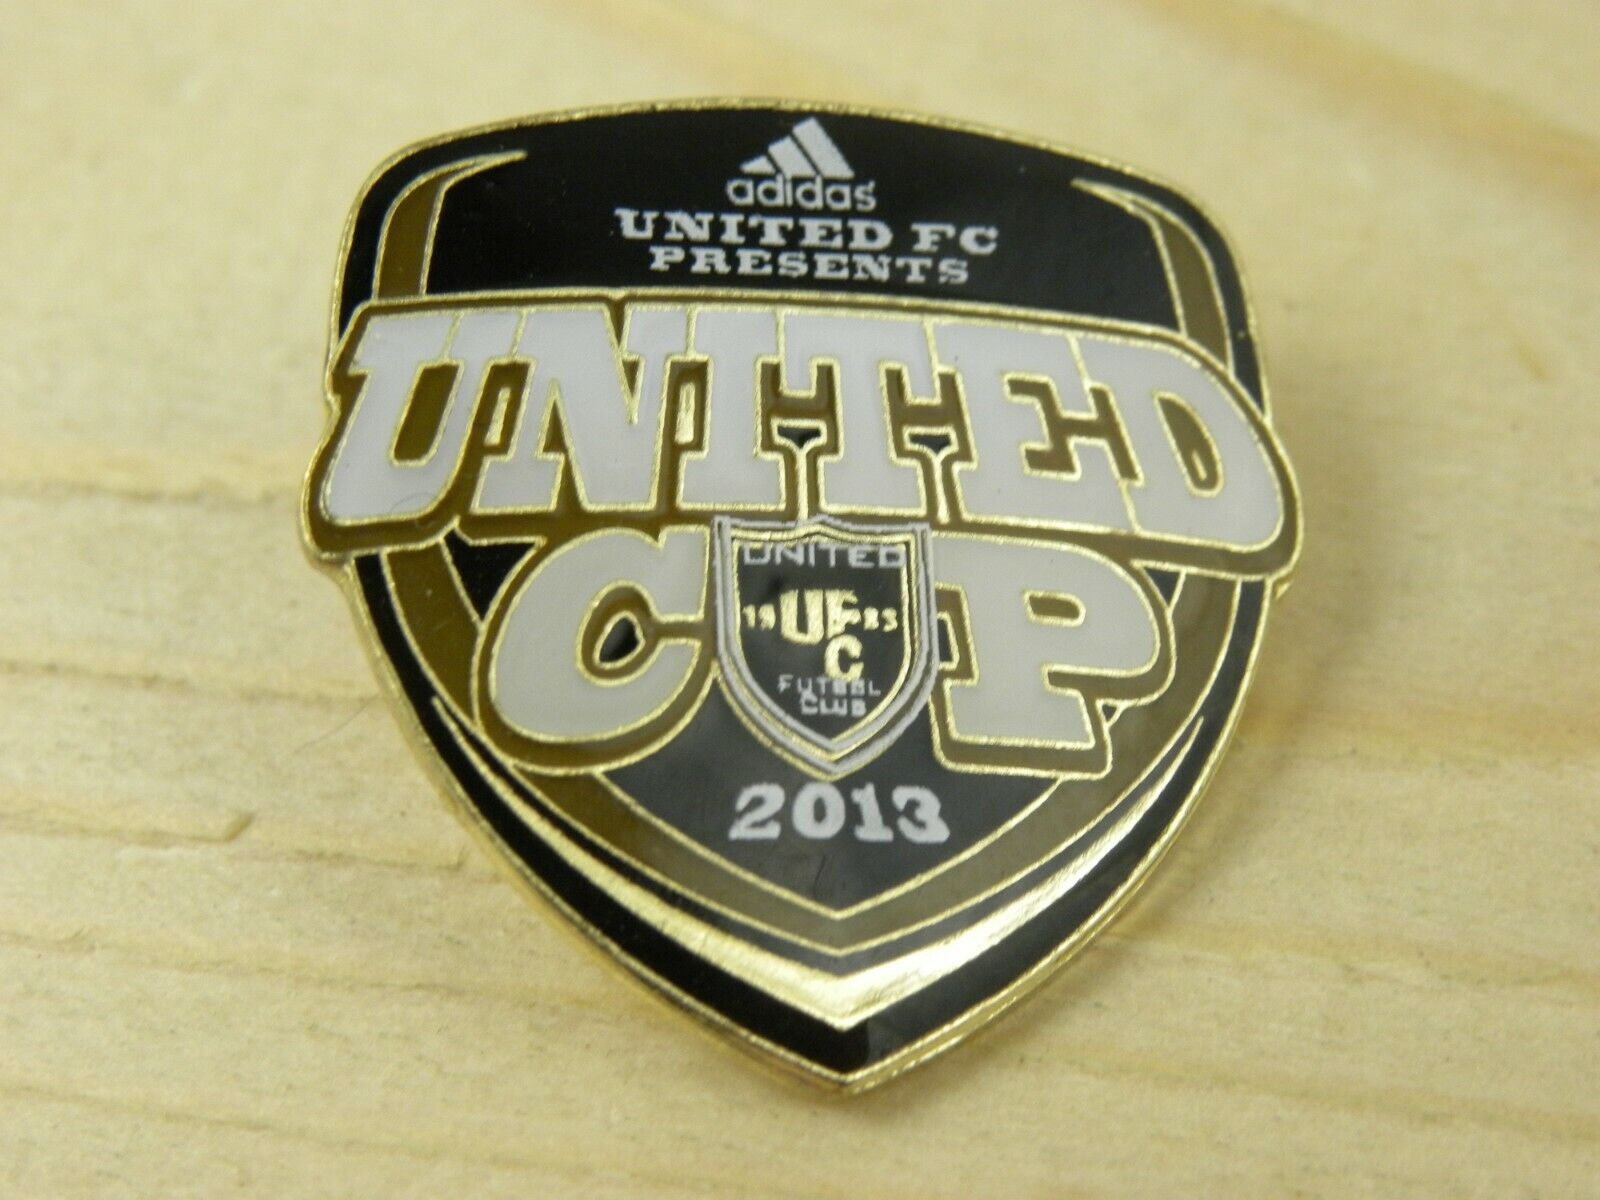 United Cup Youth Soccer Pin 2013 Adidas Sponsor Sports 